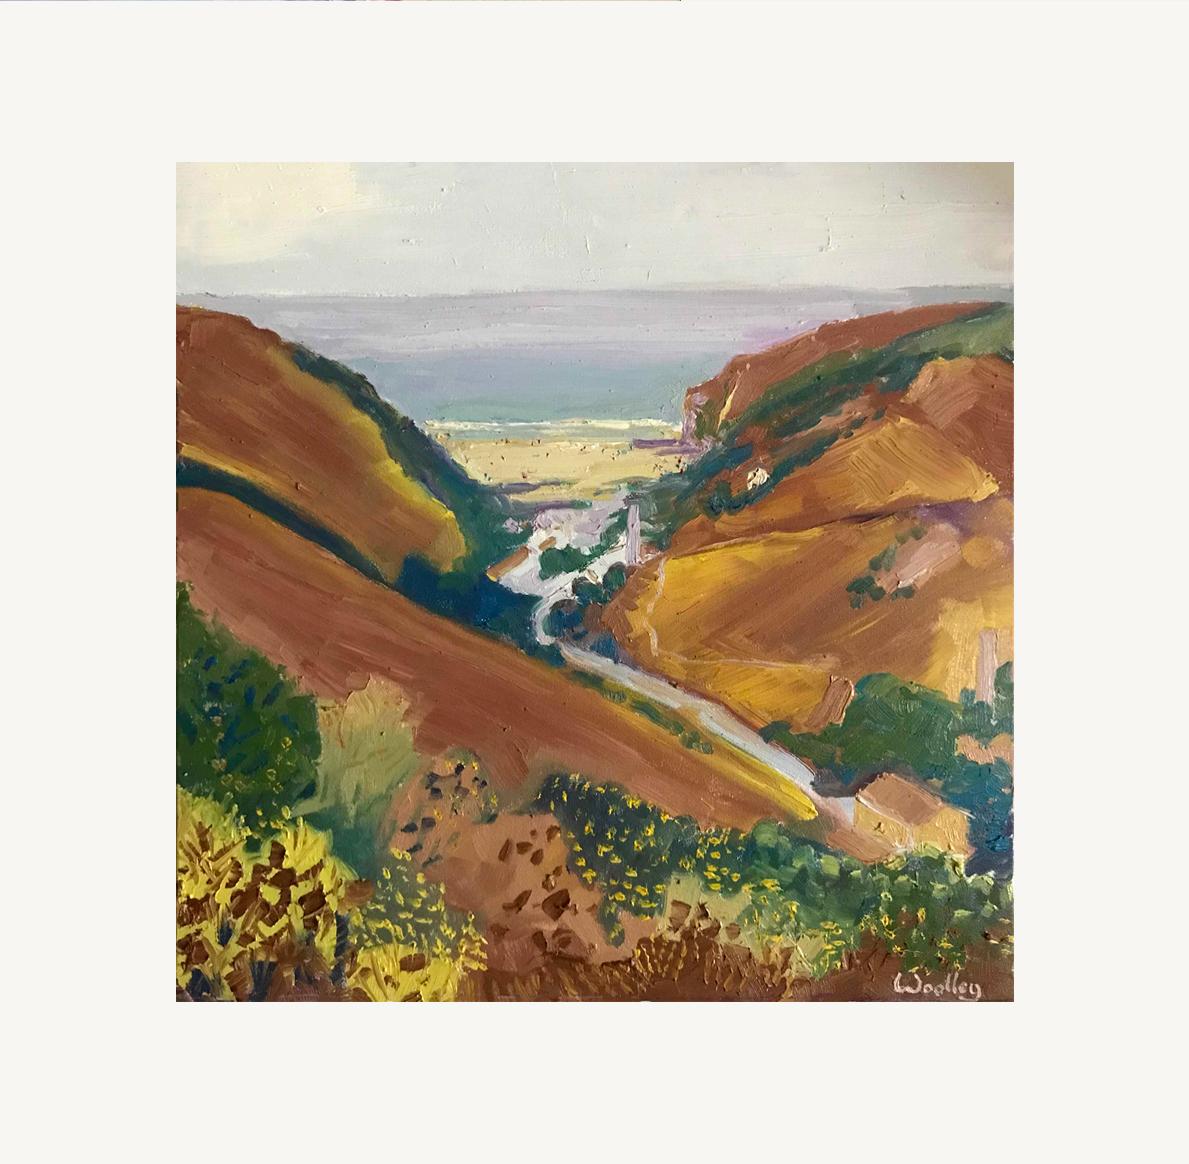 Porthtowan Heather is an Original Painting by Eleanor Woolley. Painted of Porthtowan headland and finished in the Artist's Gloucestershire Studio, this Painting depicts the russet heather hillside descending to Porthtowan beach. The copper coloured